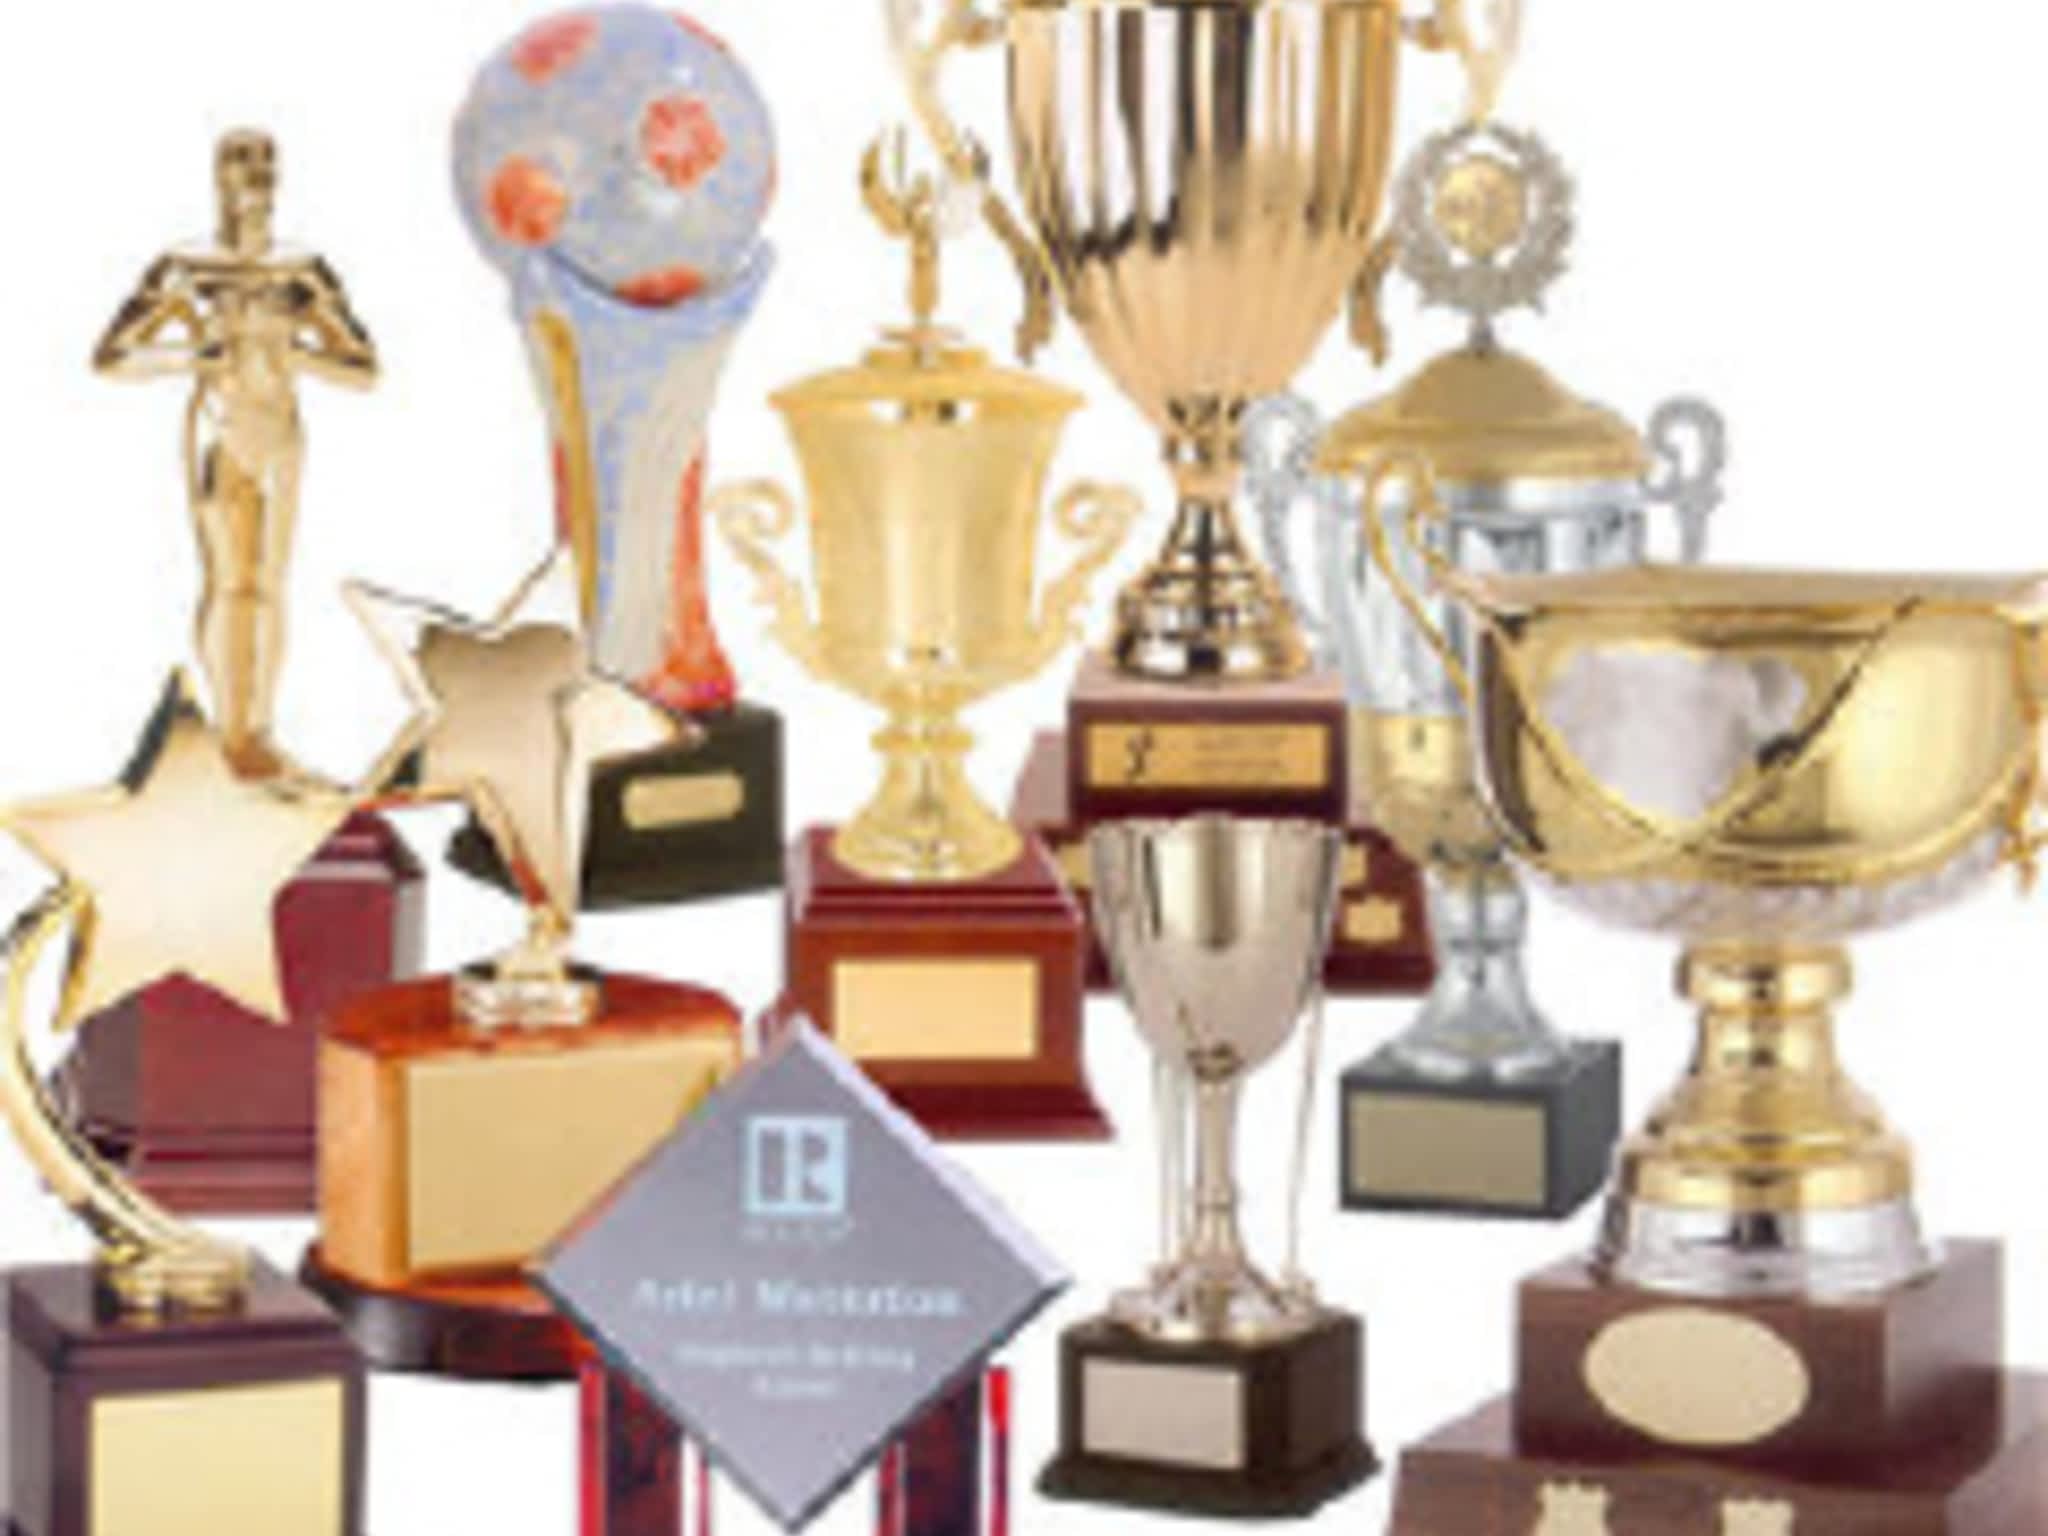 photo LRS Trophy & Promotional Products